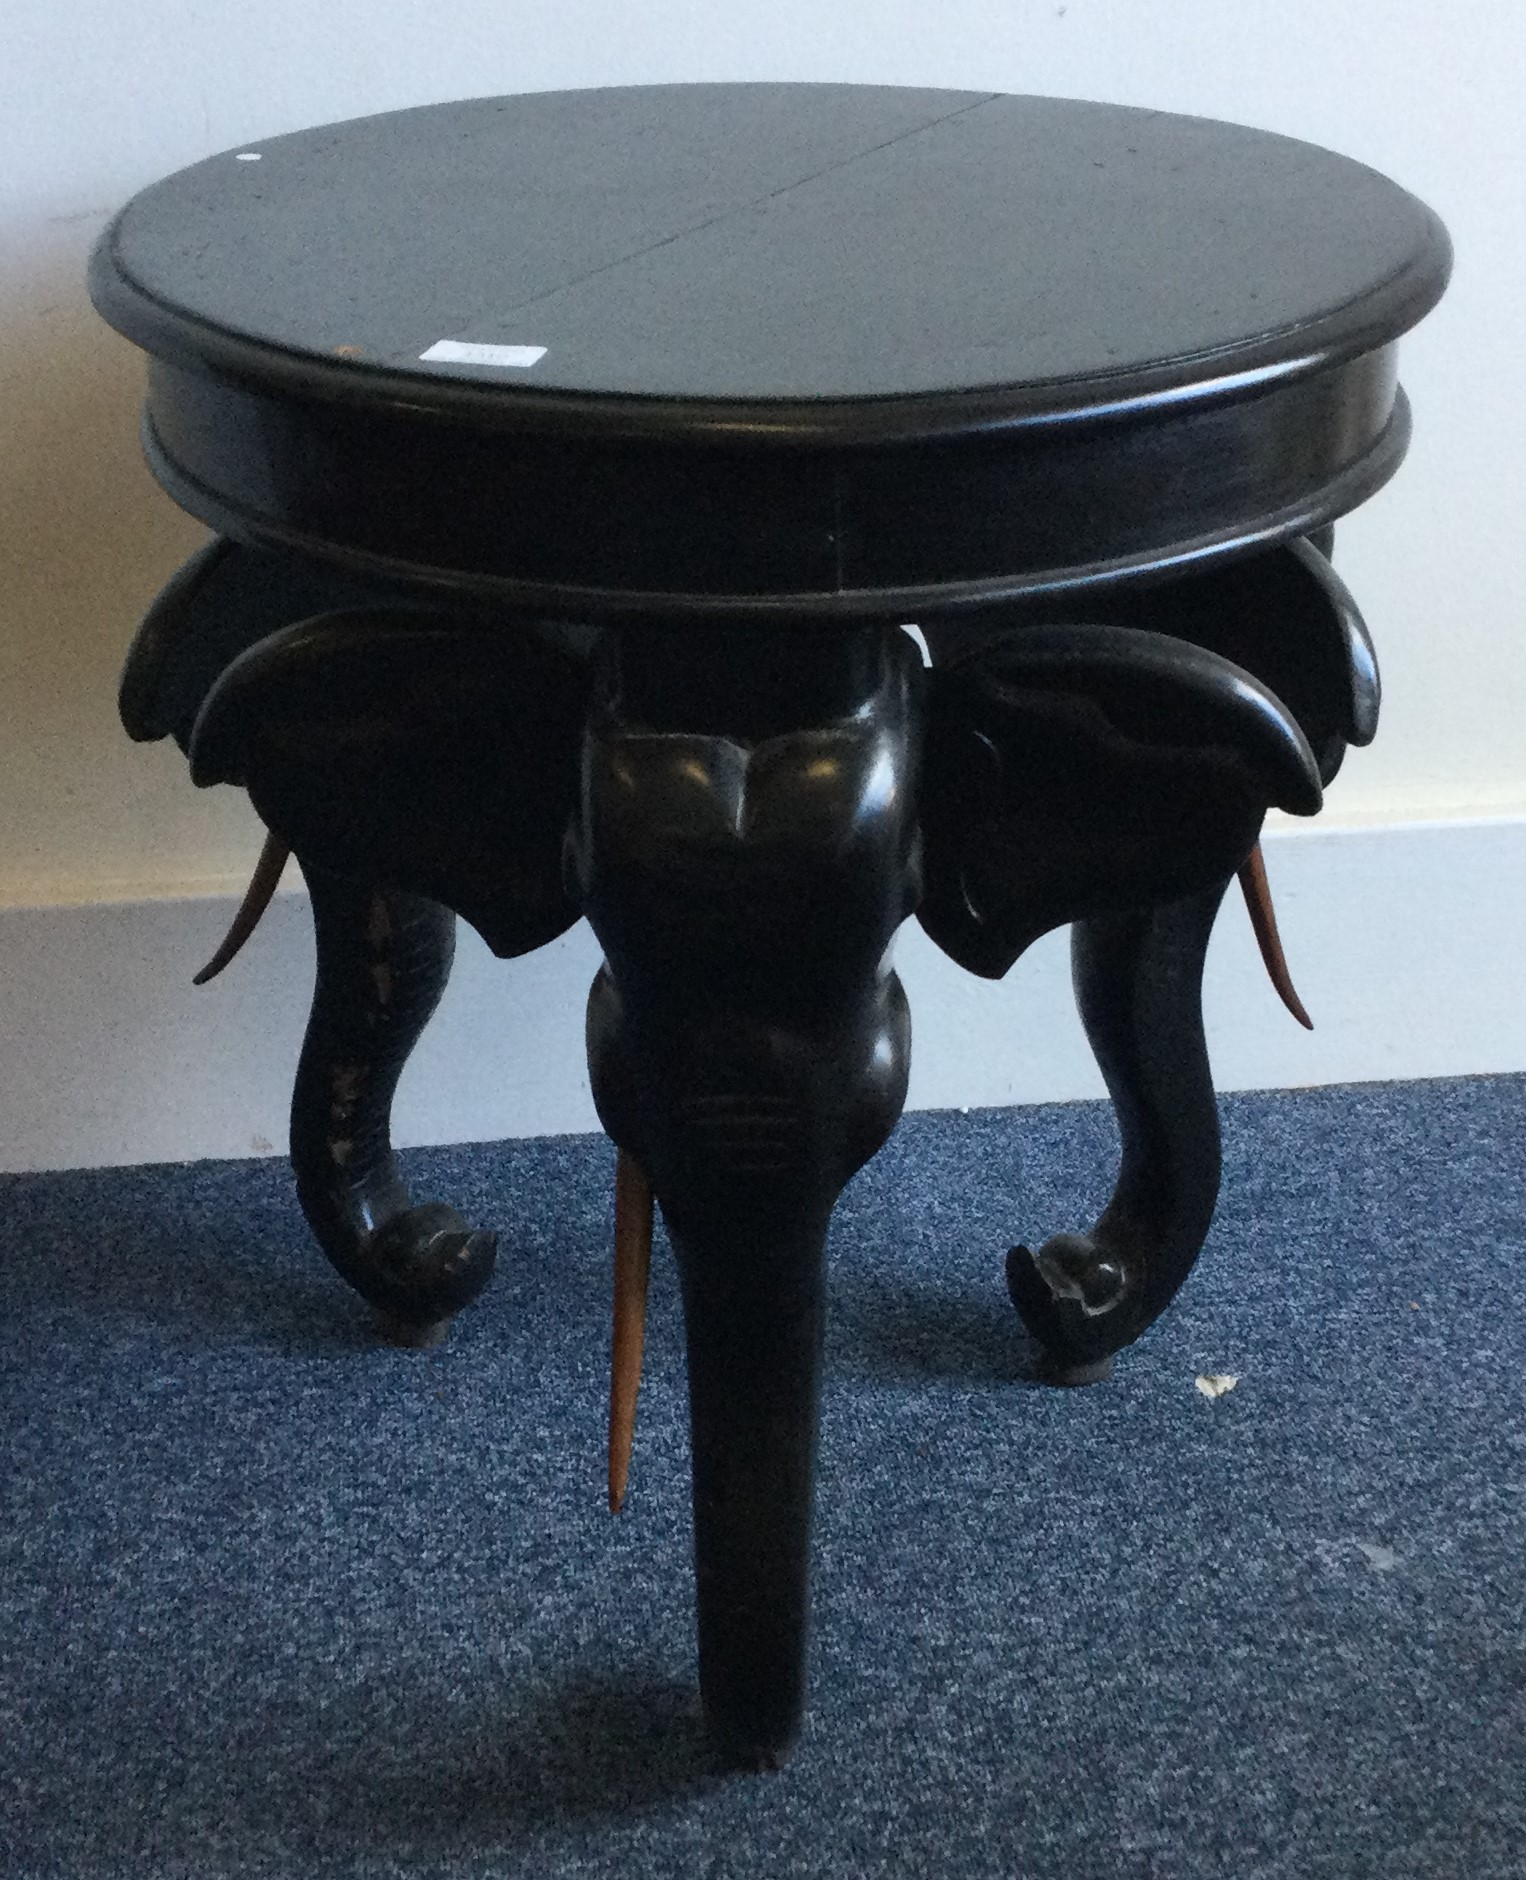 An unusual circular ebony table decorated with animals.